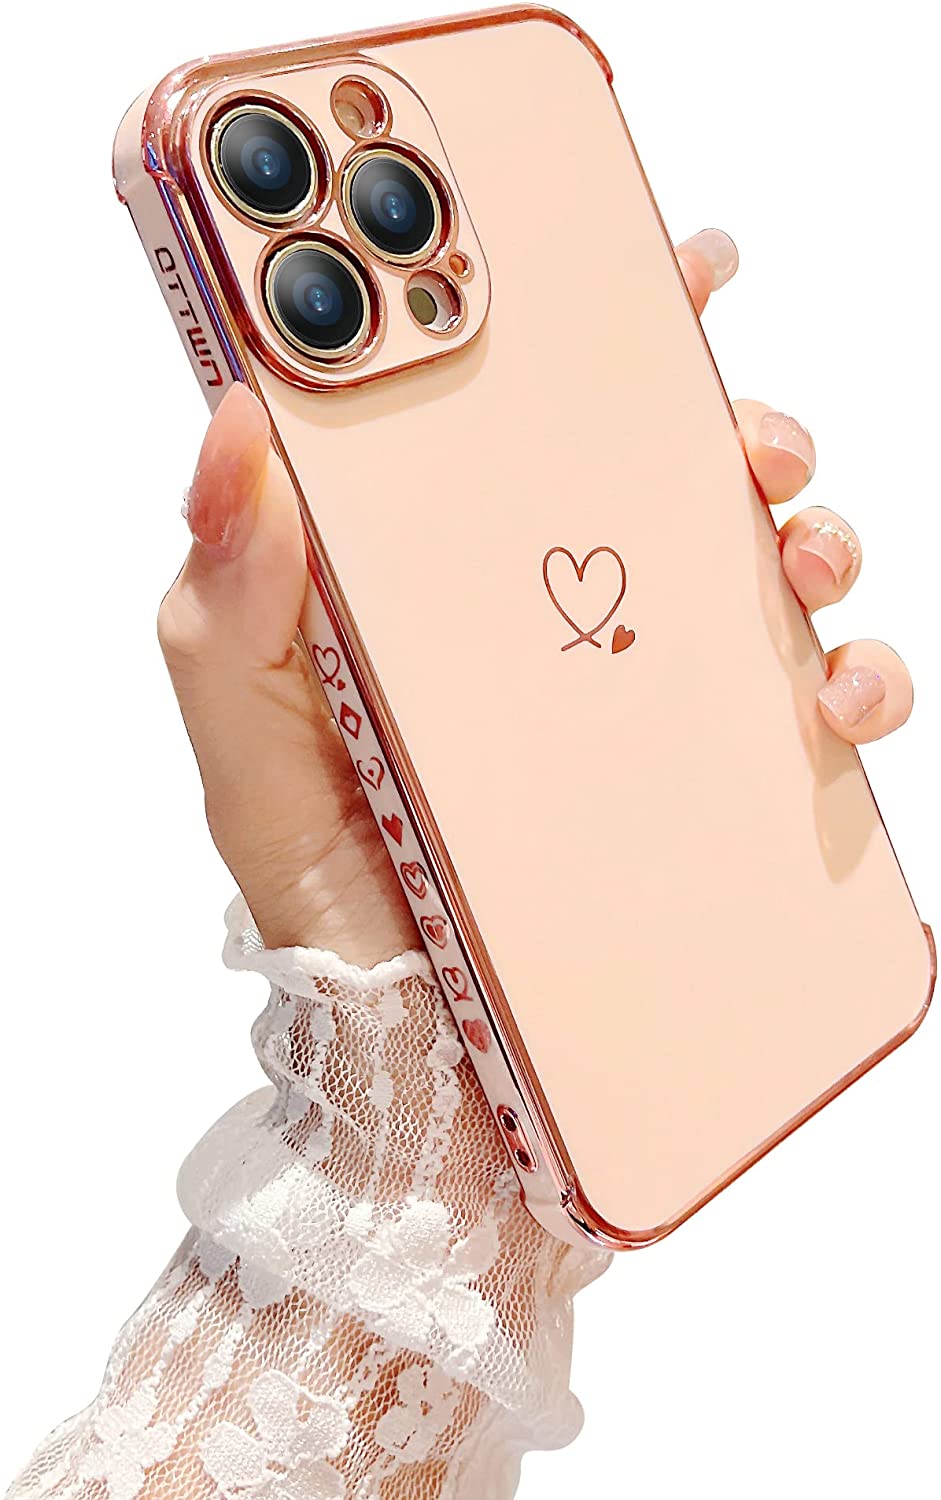  iPhone 13 Pro Max Case for $2.20 for Women Soft TPU 